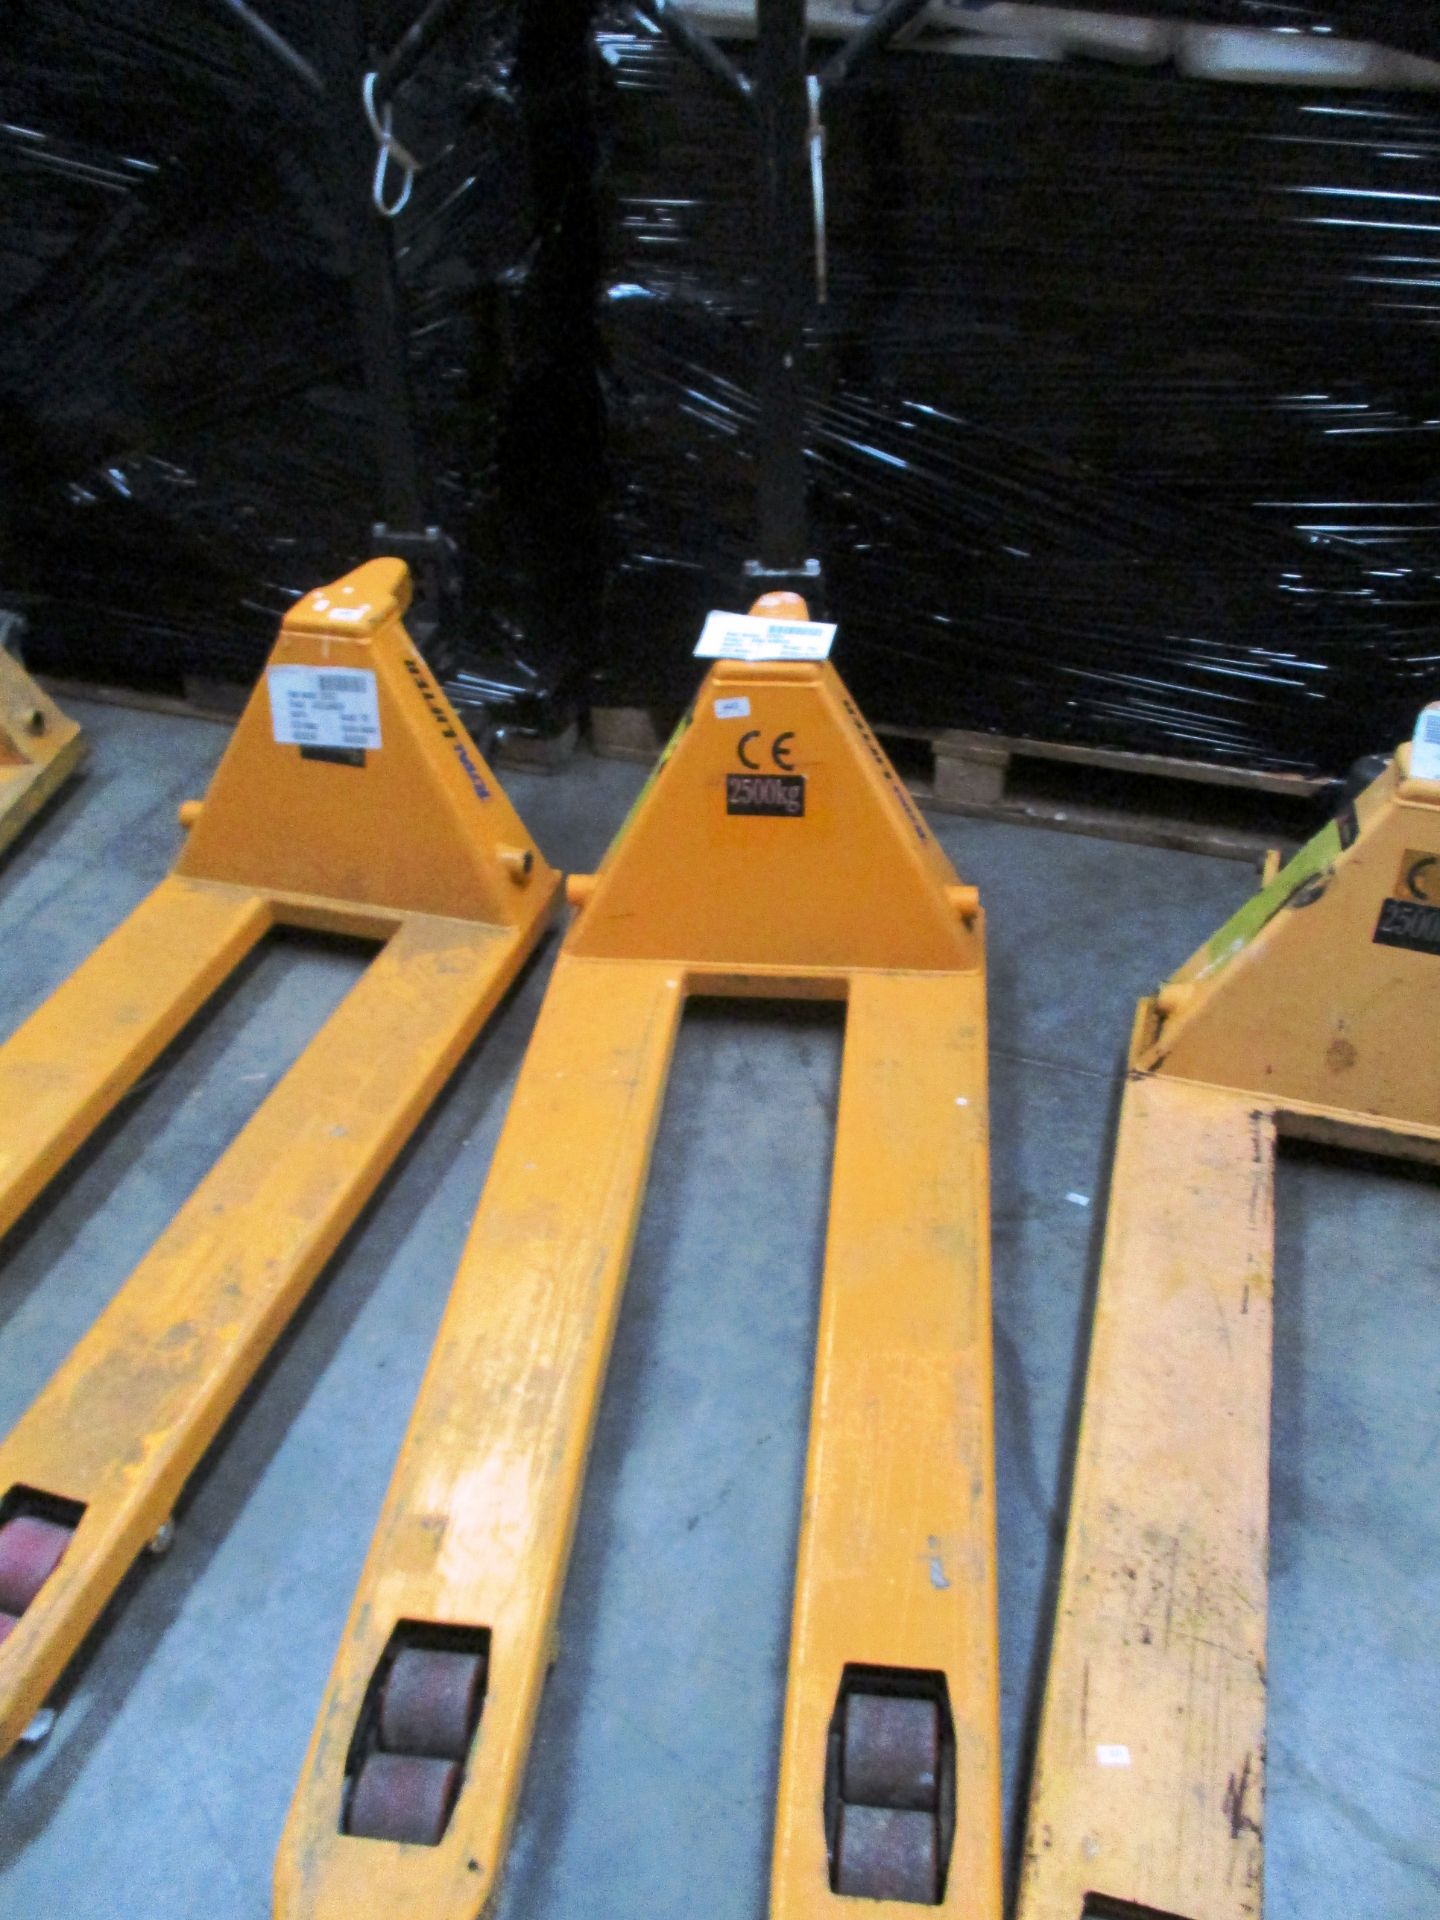 A Total lifter 2500kg yellow pallet truck ref AB0411183